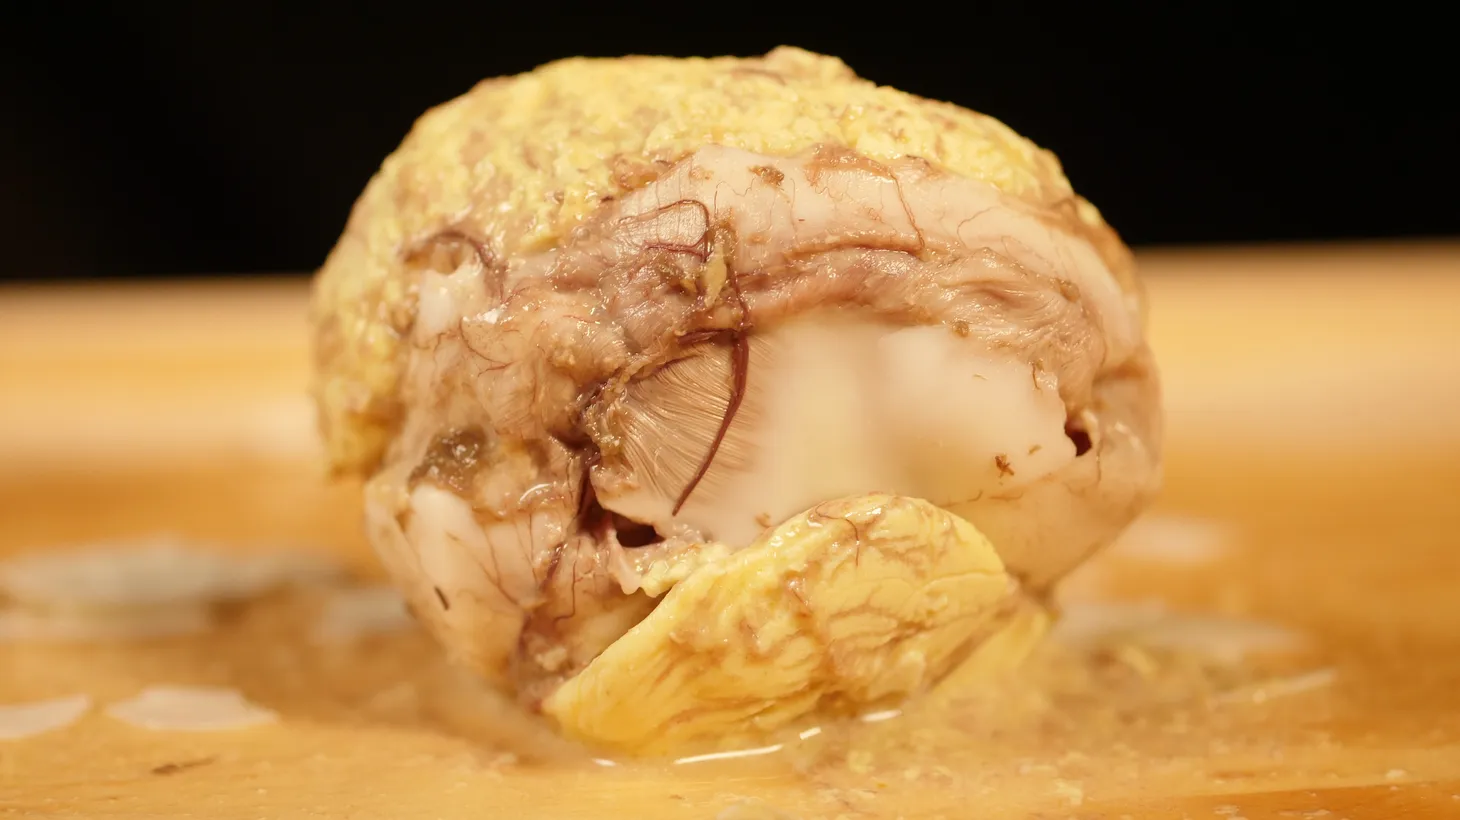 Balut, a common snack in the Philippines, is a partially formed chicken or duck, seen here without a shell.